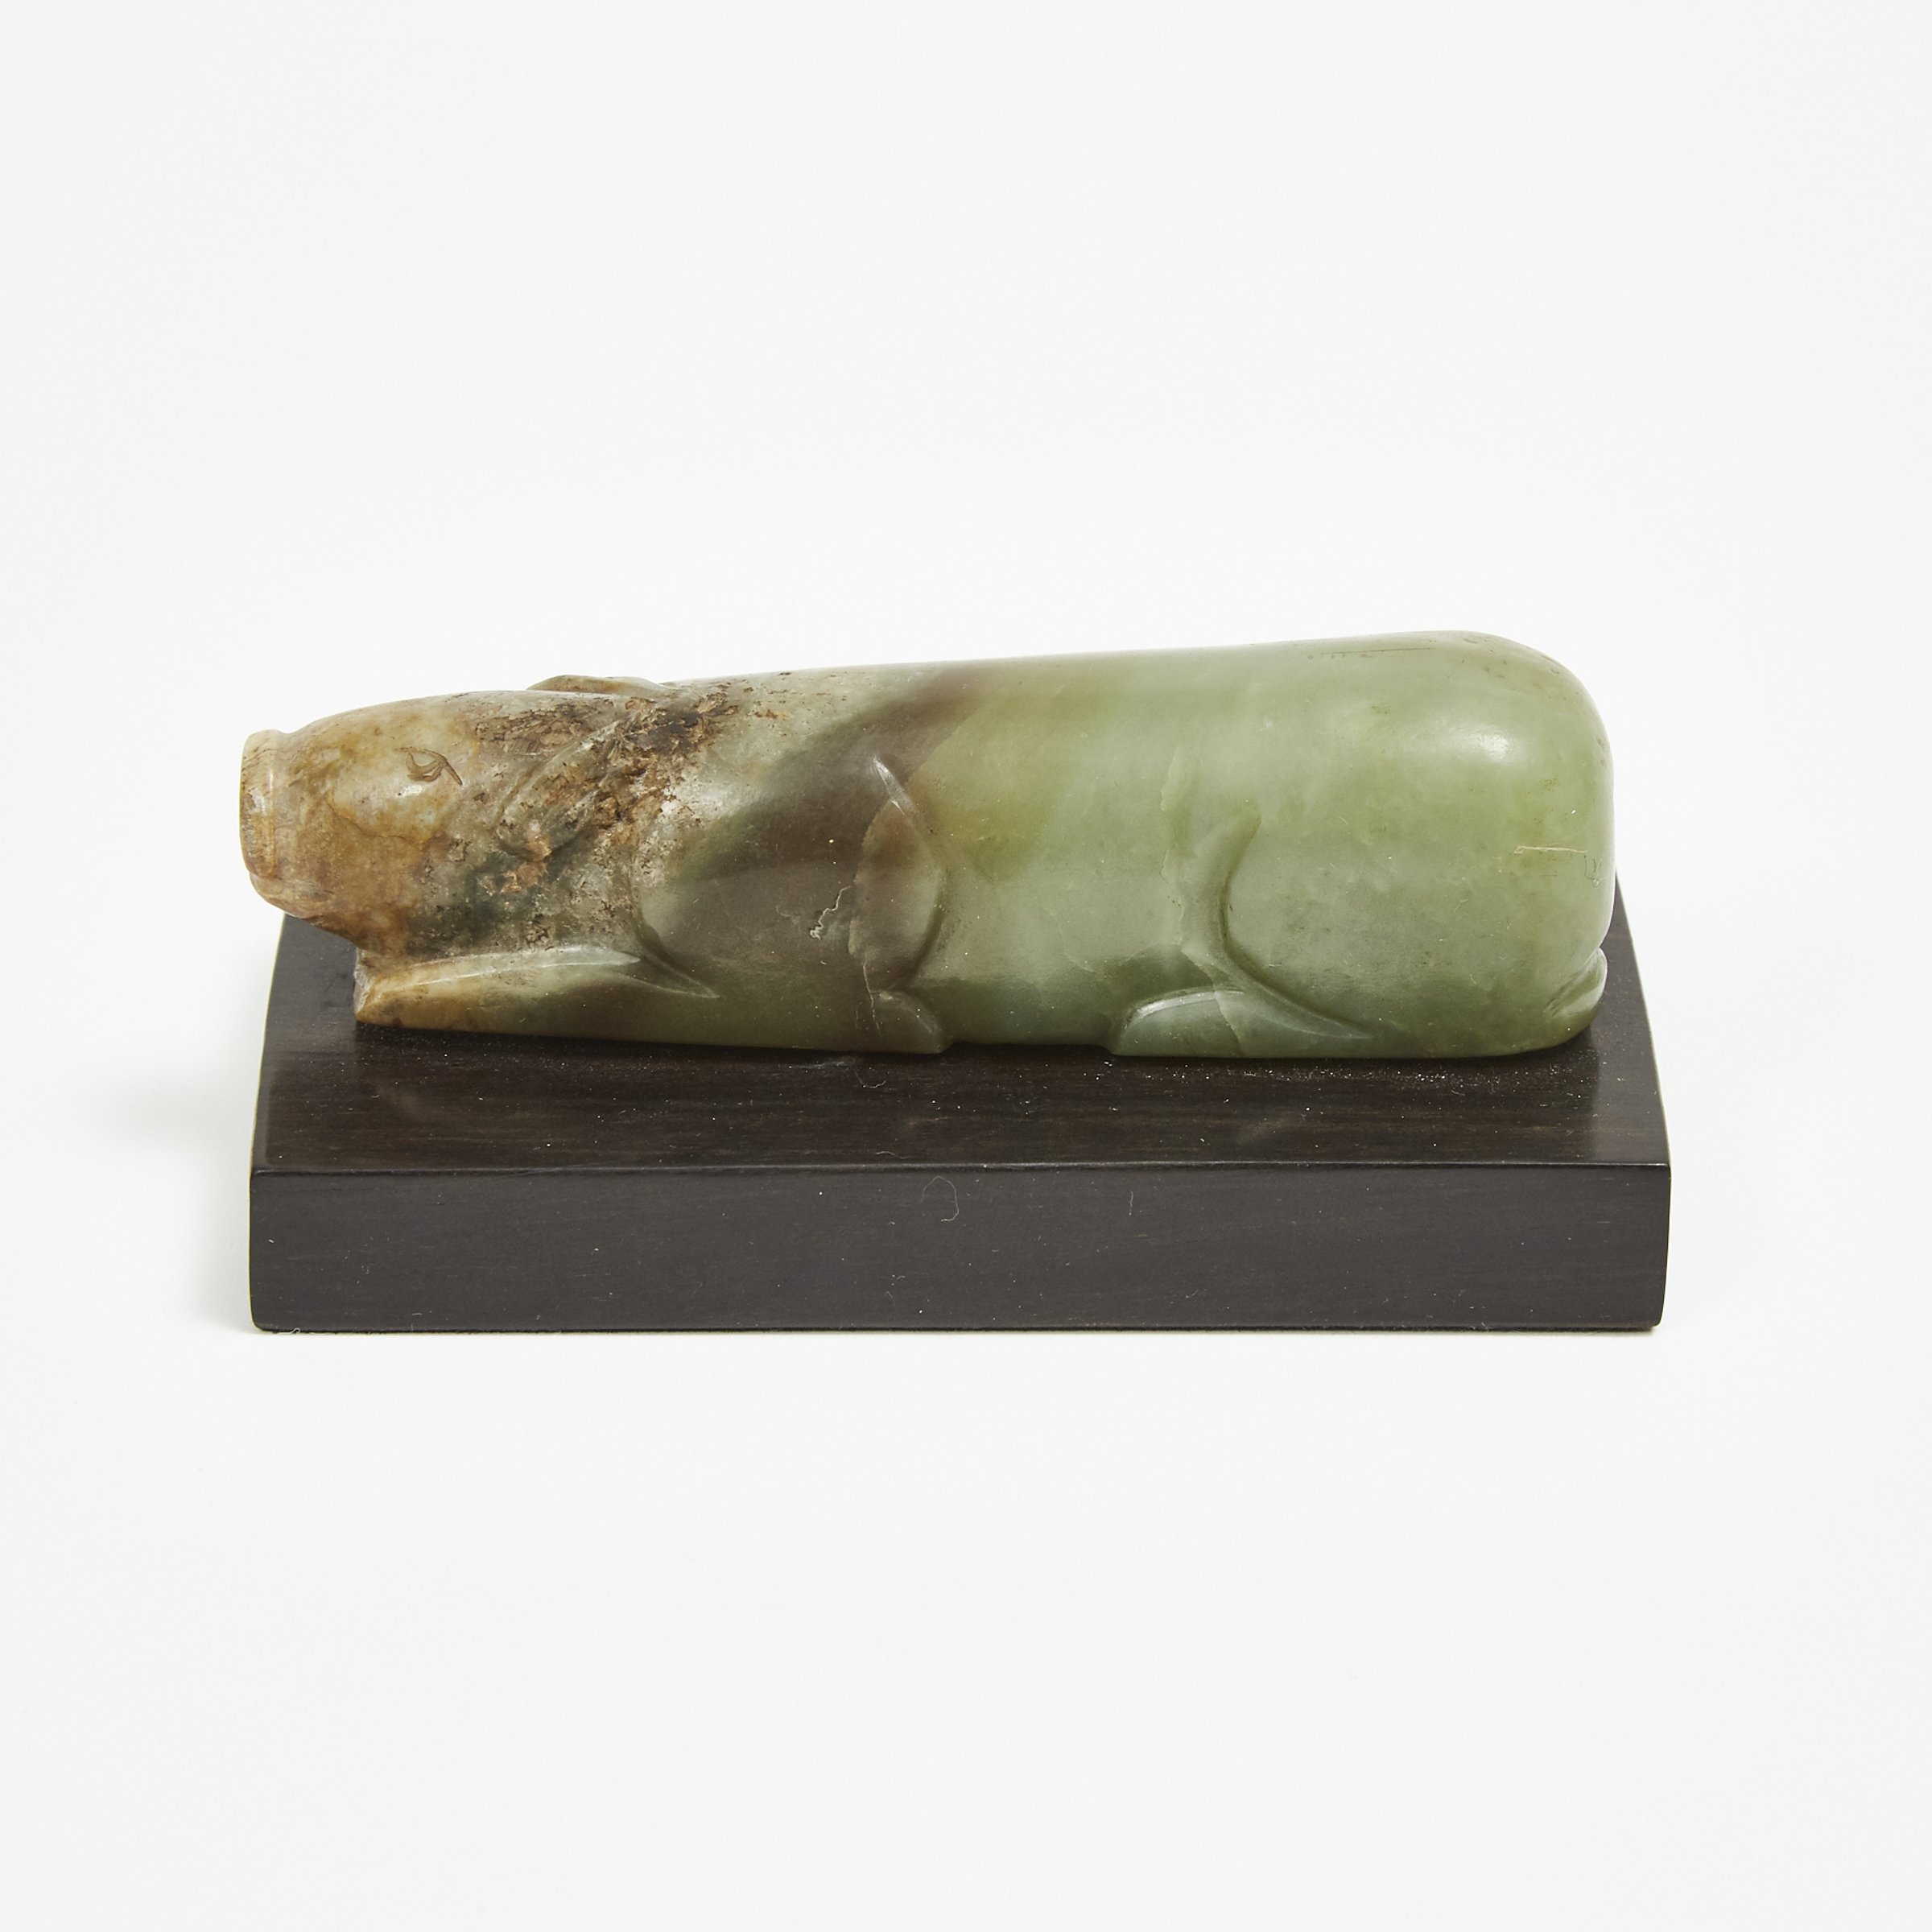 A Green Jade Carving of a Pig, Possibly Han Dynasty